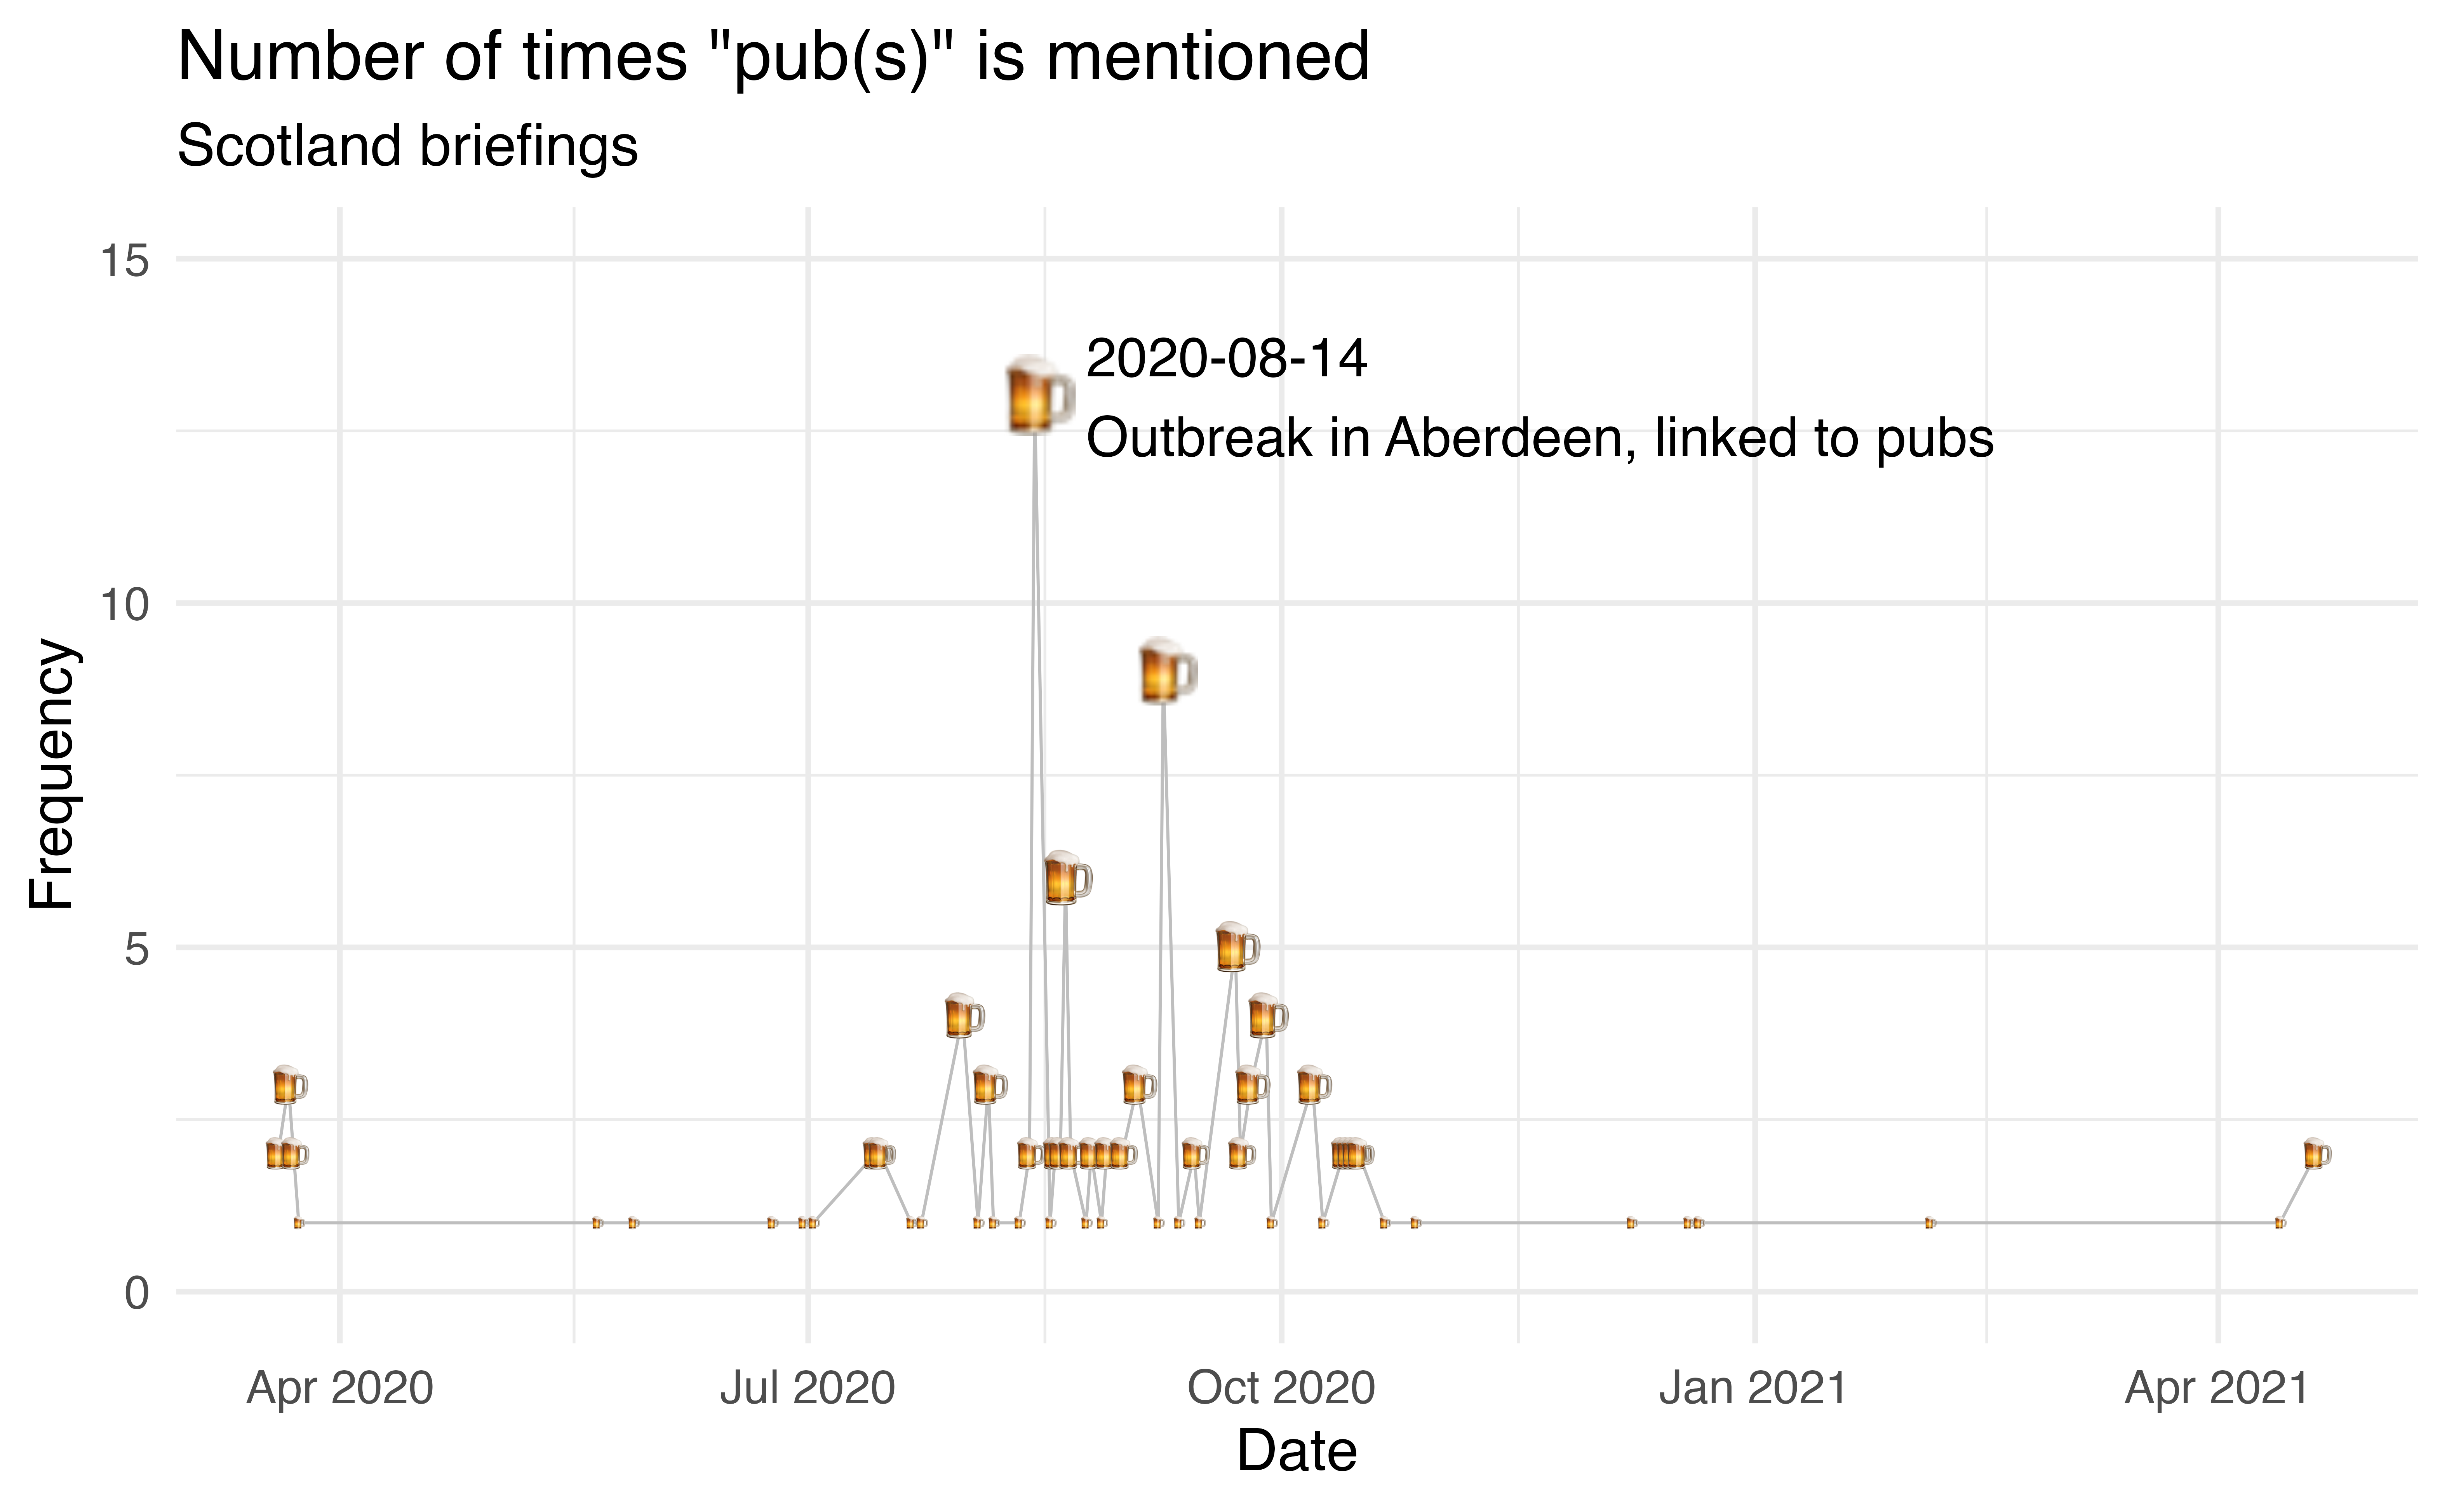 Pubs were mentioned most often between August and October and most of those mentions were related to outbreaks. On August 14, 2020, pubs were mentioned 13 times, and this date corresponds to the outbreak in Aberdeen that was linked to transmission in pubs. Since October there weren't many mentions of pubs, until in the most recent briefing in April they were mentioned twice.